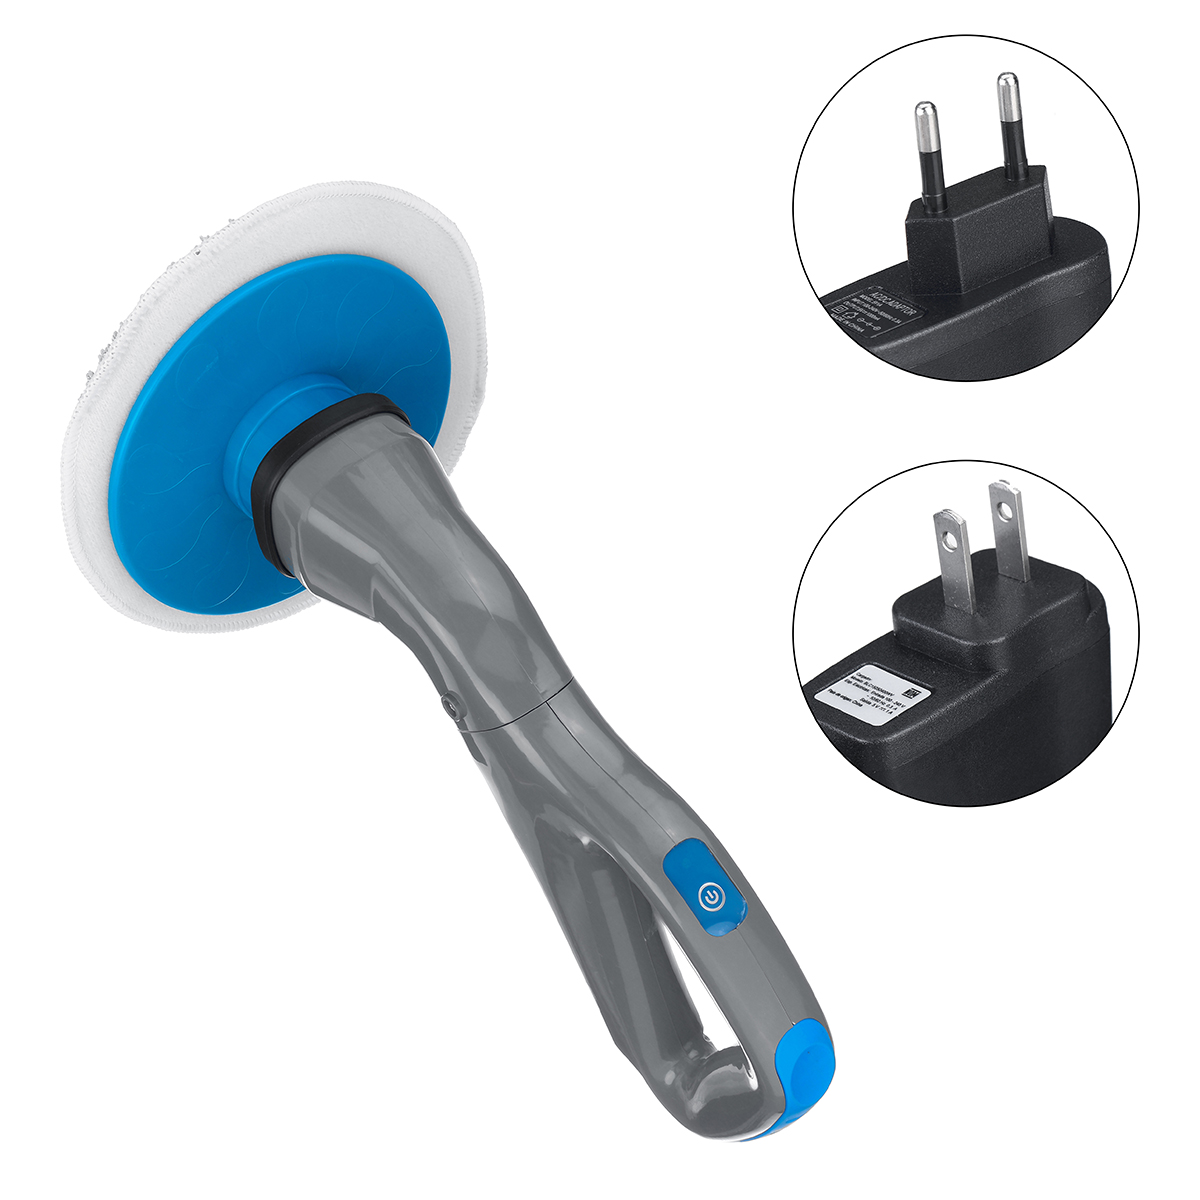 All-in-1-Muscle-Electrical-Cleaning-Brush-Scrubber-Cordless-Bathroom-Shower-Tile4-Heads-1768759-3